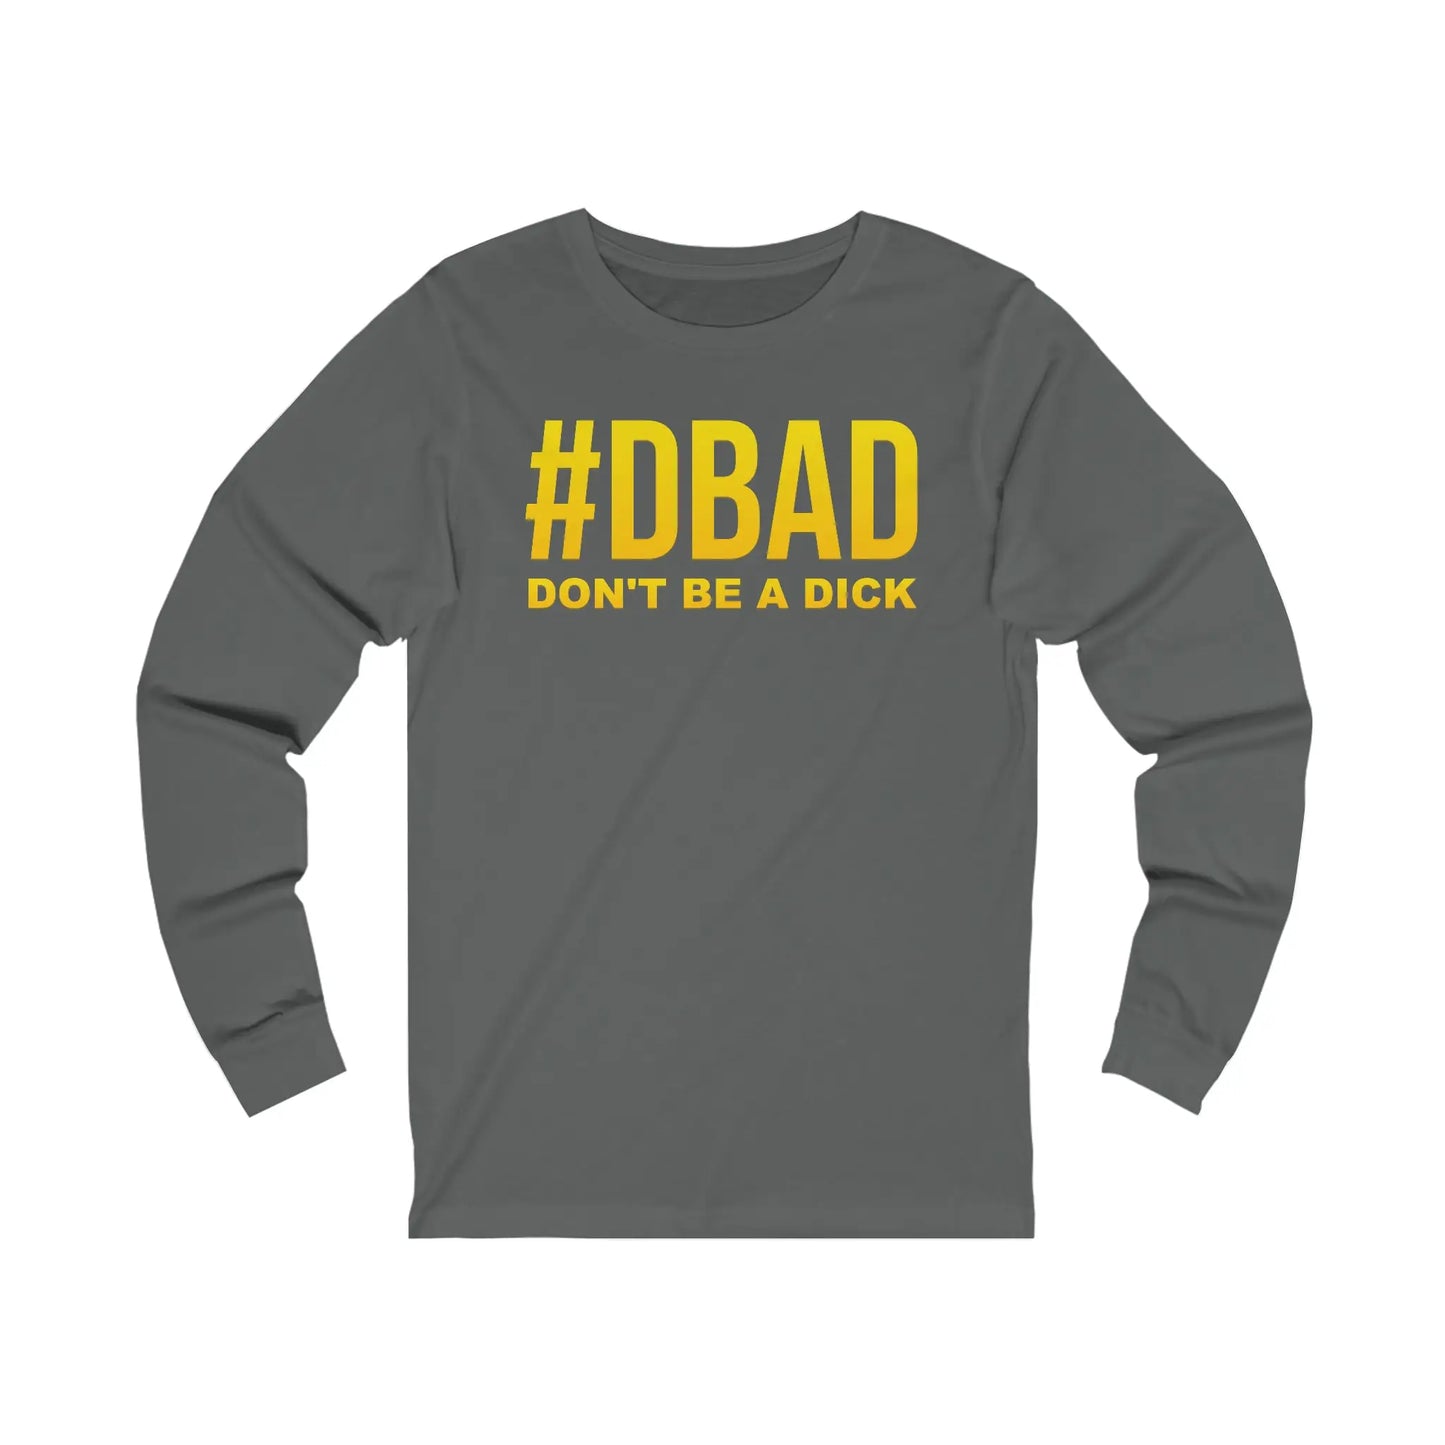 Don't Be A D*ck Men's Long Sleeve Tee - Wicked Tees